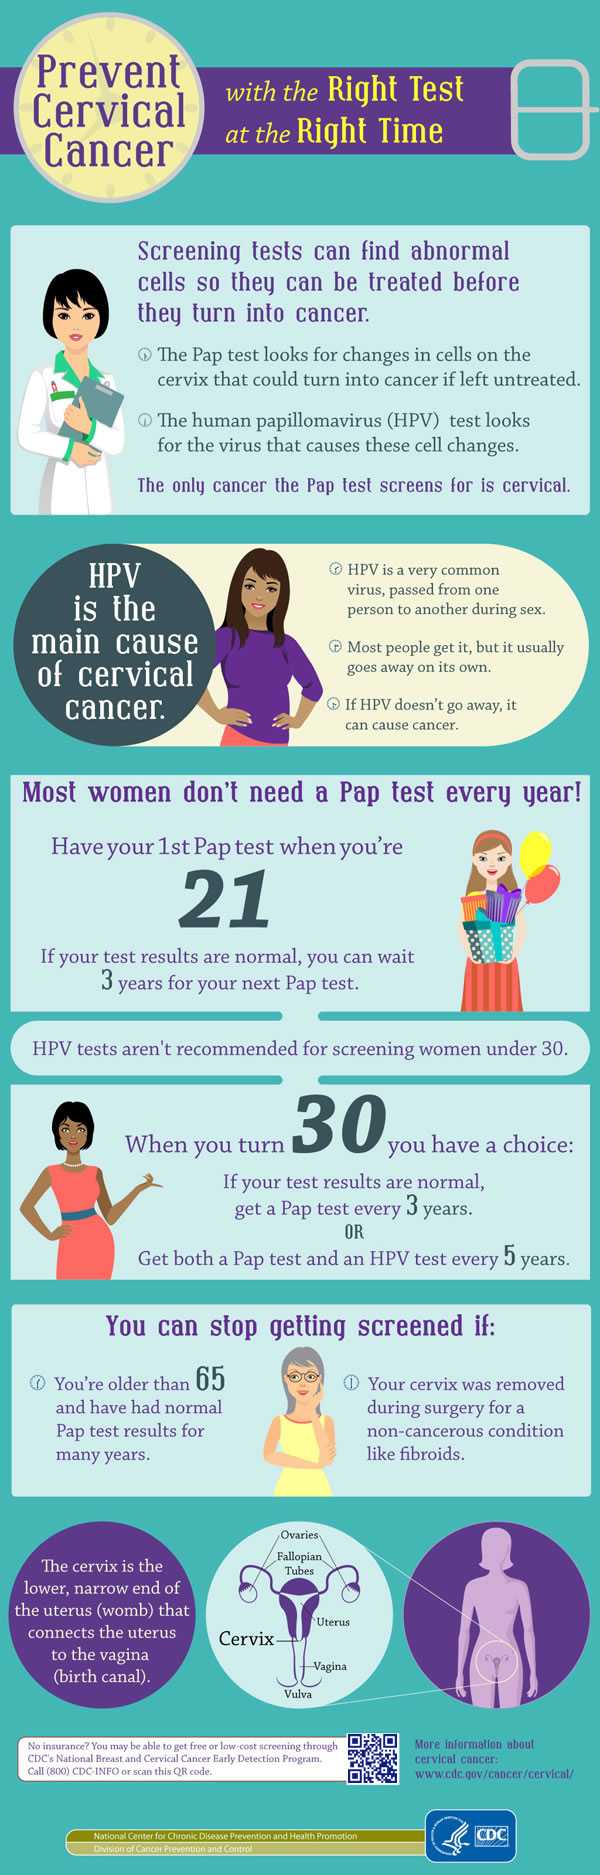 CDC - Infographic titled Prevent Cervical Cancer with the Right